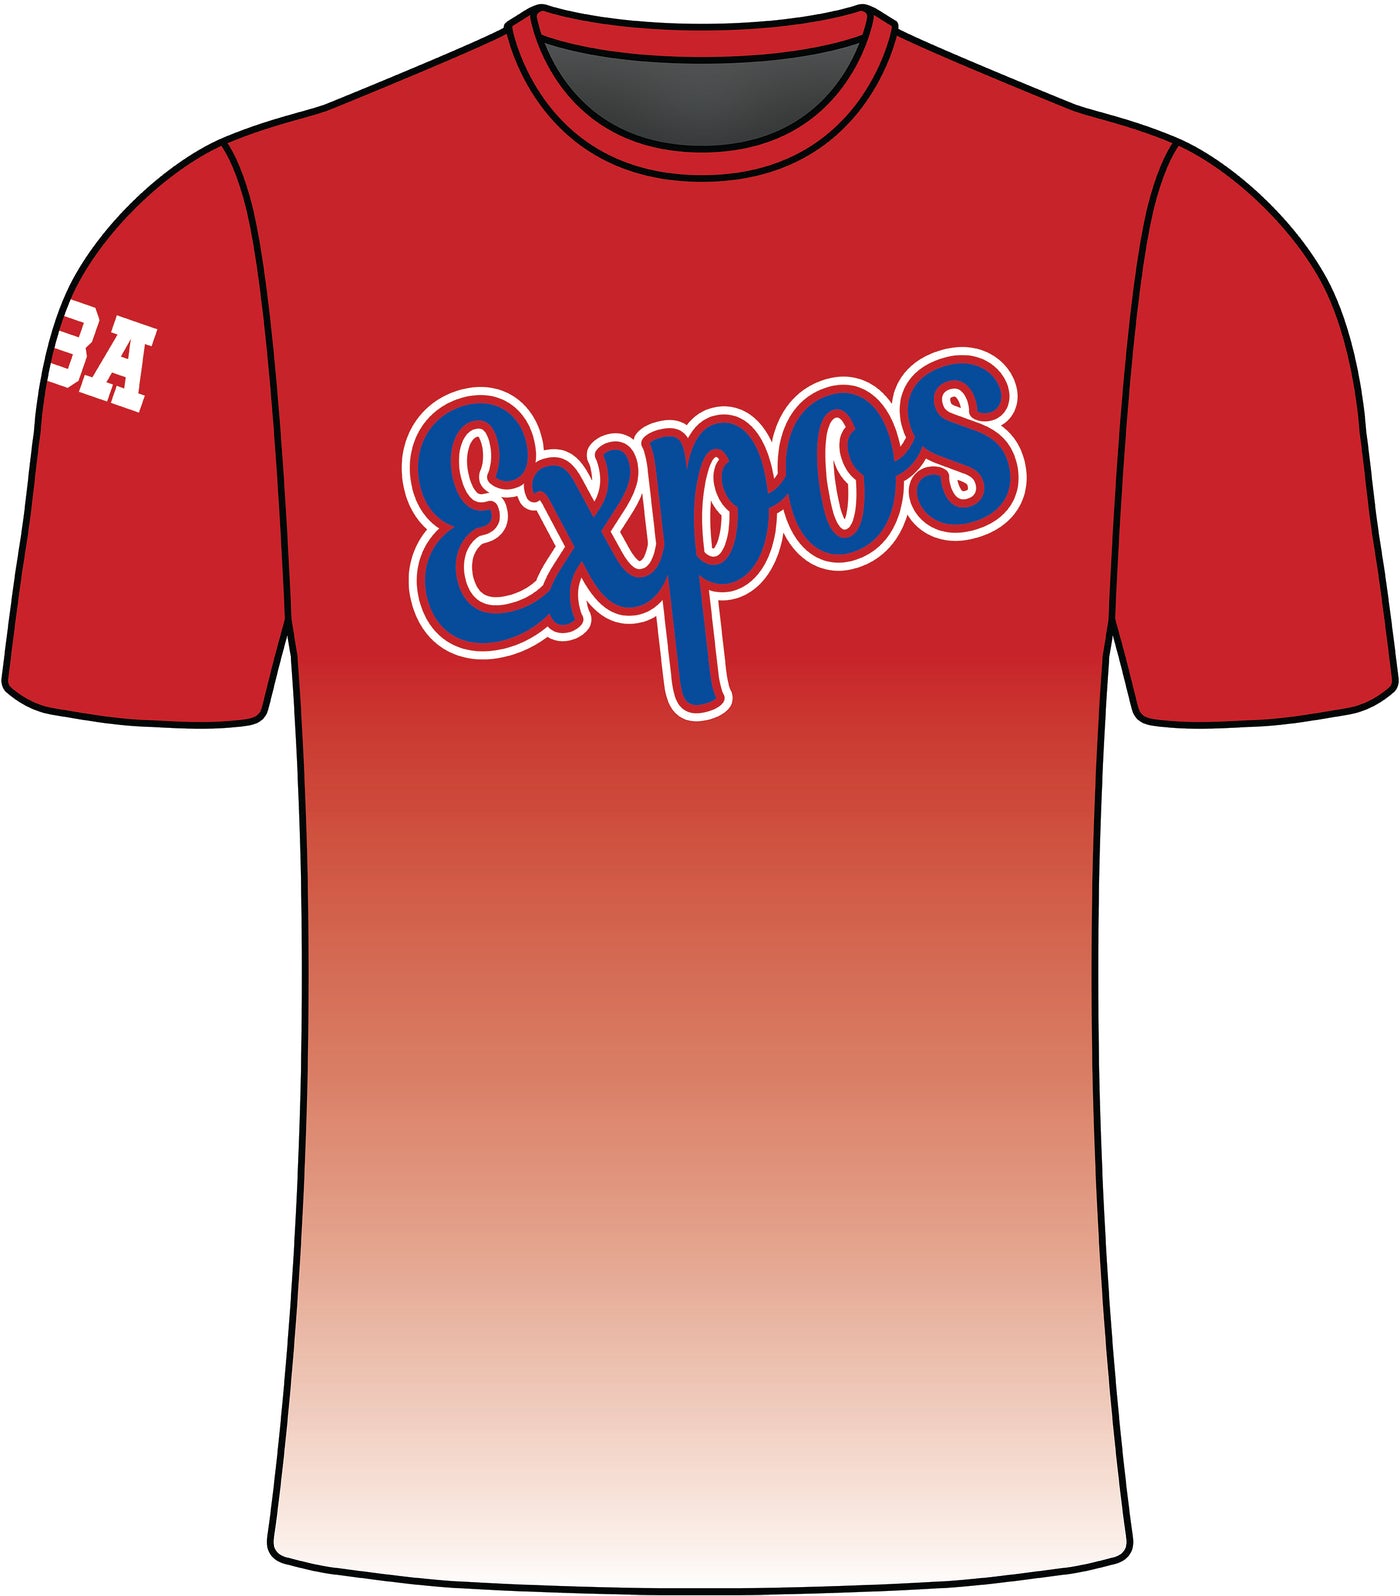 Full Dye Sublimated Short Sleeve Jersey Red Stripe Expos 3X-Large